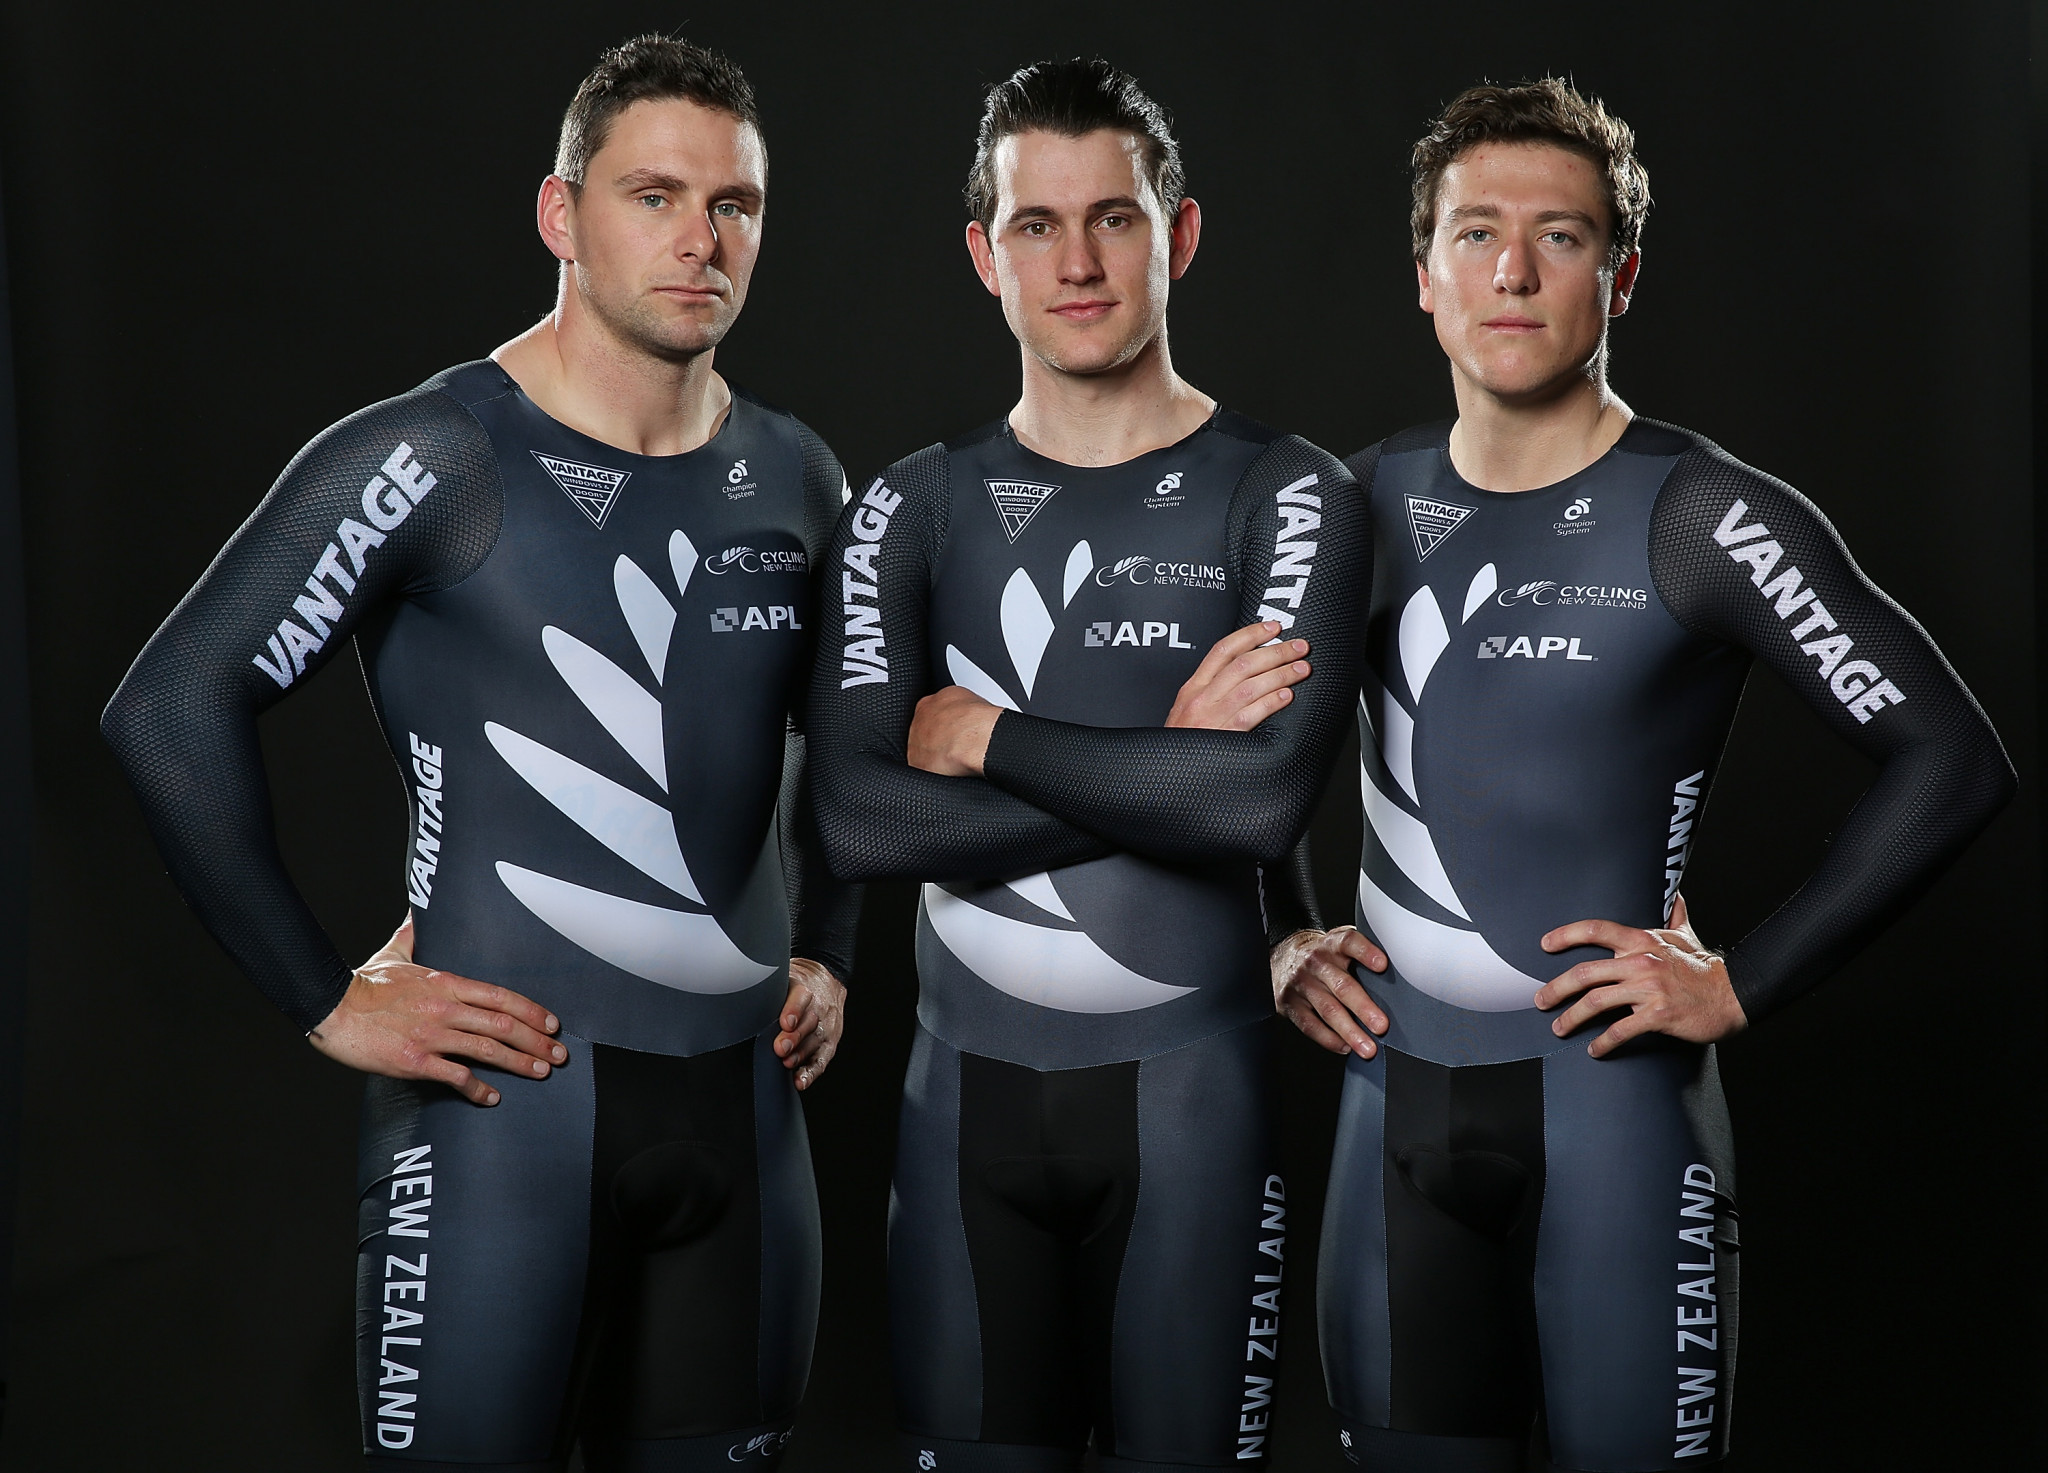 Defending champions and Olympic gold medal rower lead New Zealand cycling team at Gold Coast 2018